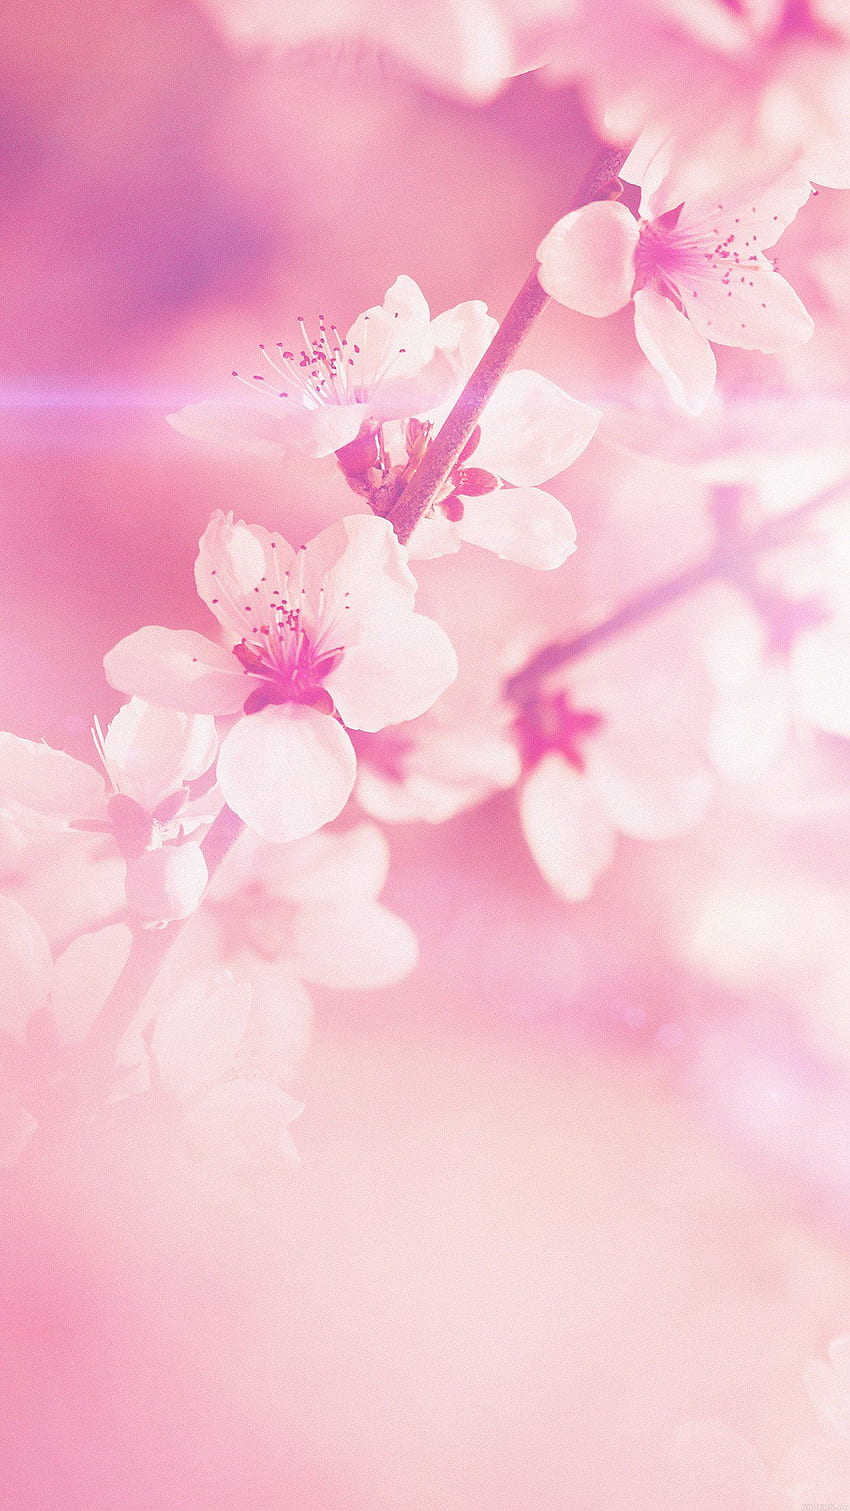 I Love Papers. spring flower pink cherry blossom flare nature HD phone wallpaper